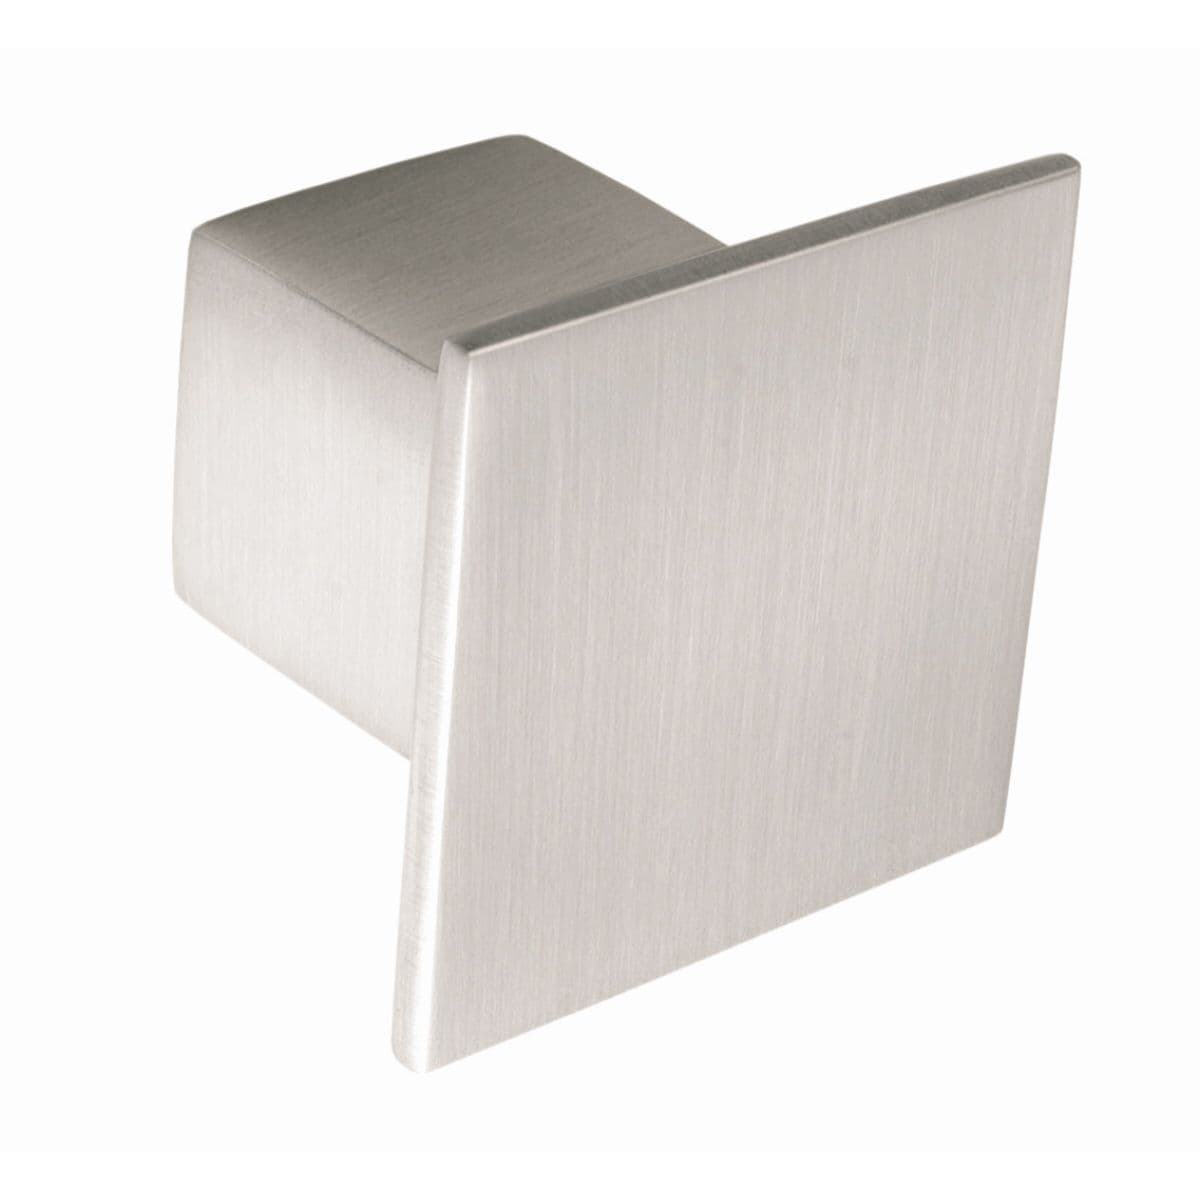 LEA/THORPE SQUARE KNOB Cupboard Handle - 36mm x 36mm - 2 finishes (PWS K353.36.SS / K354.36.CH)